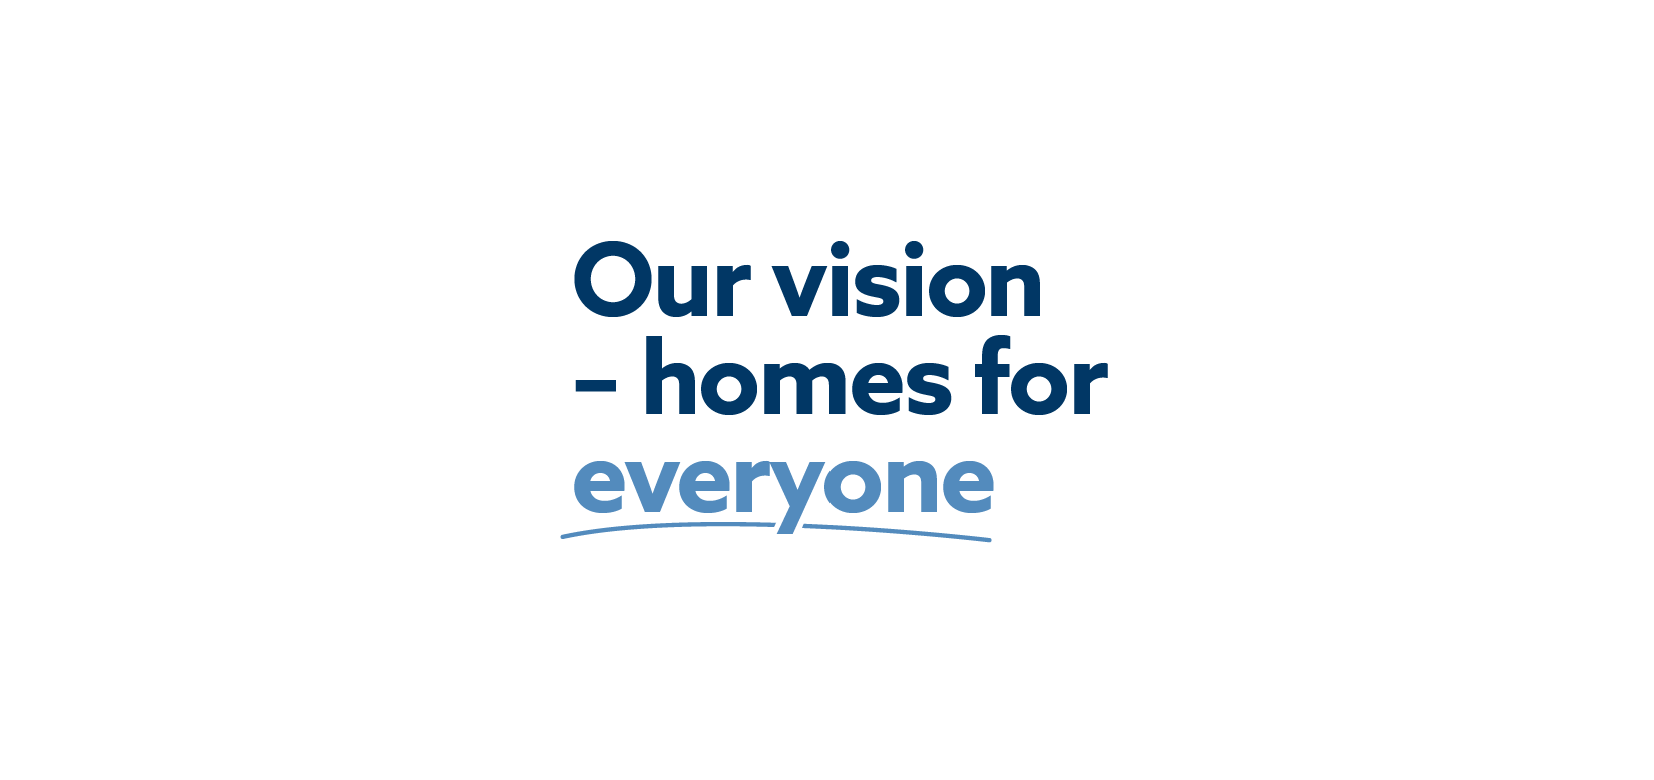 Our vision and values